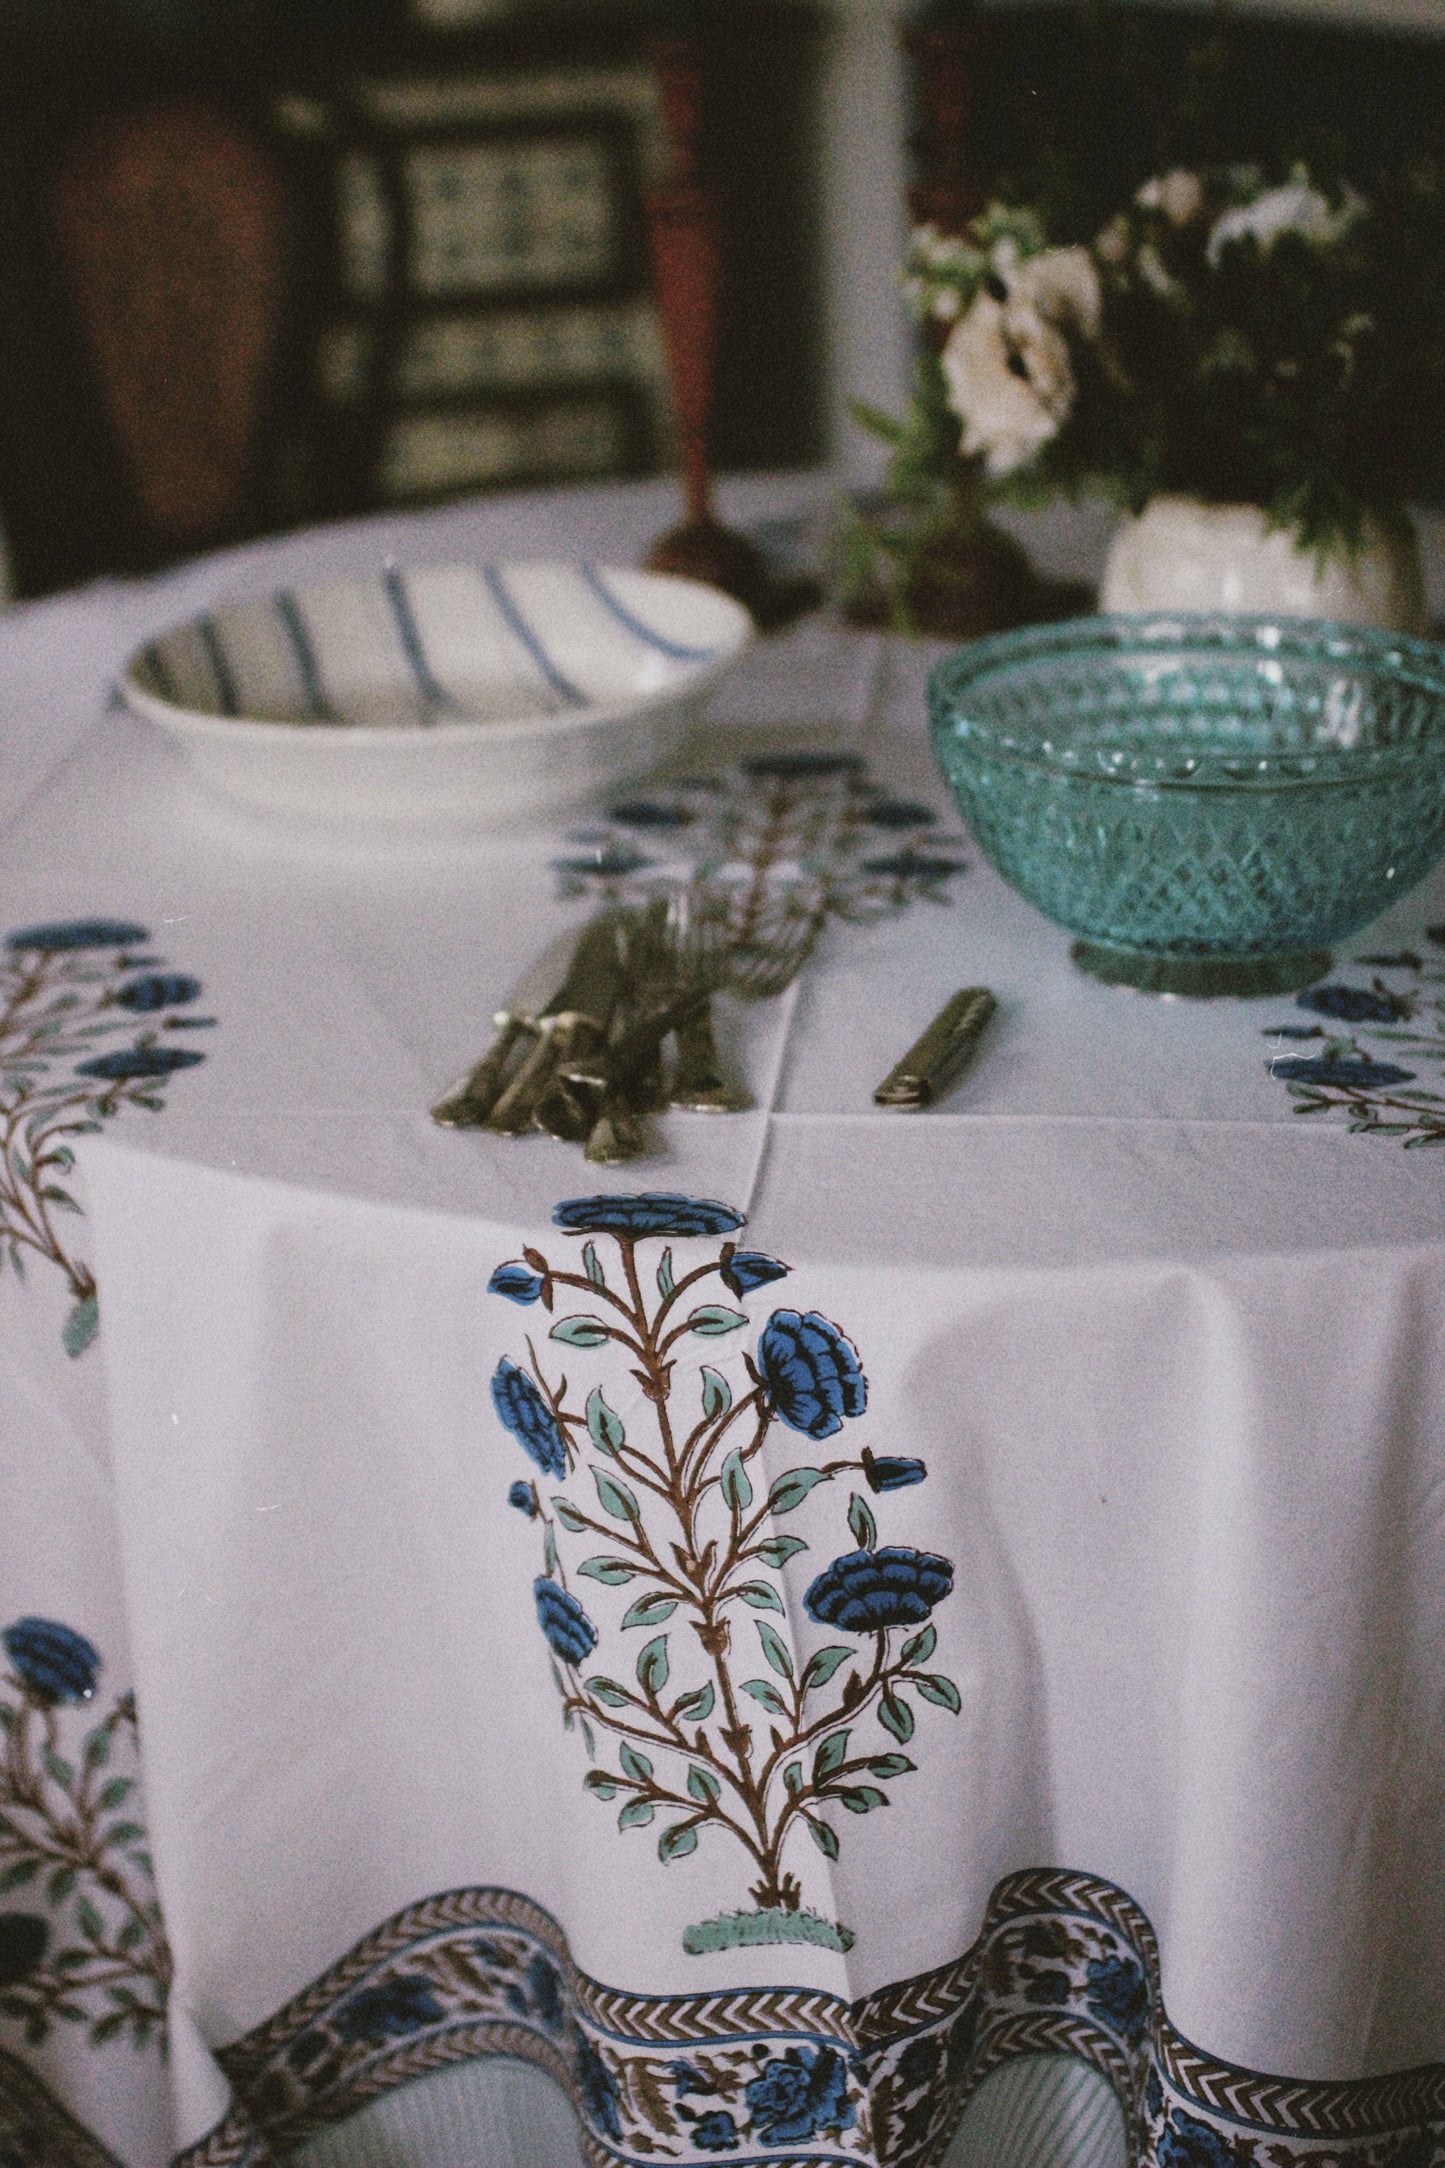 Floral Block Print Tablecloth- White and Blue